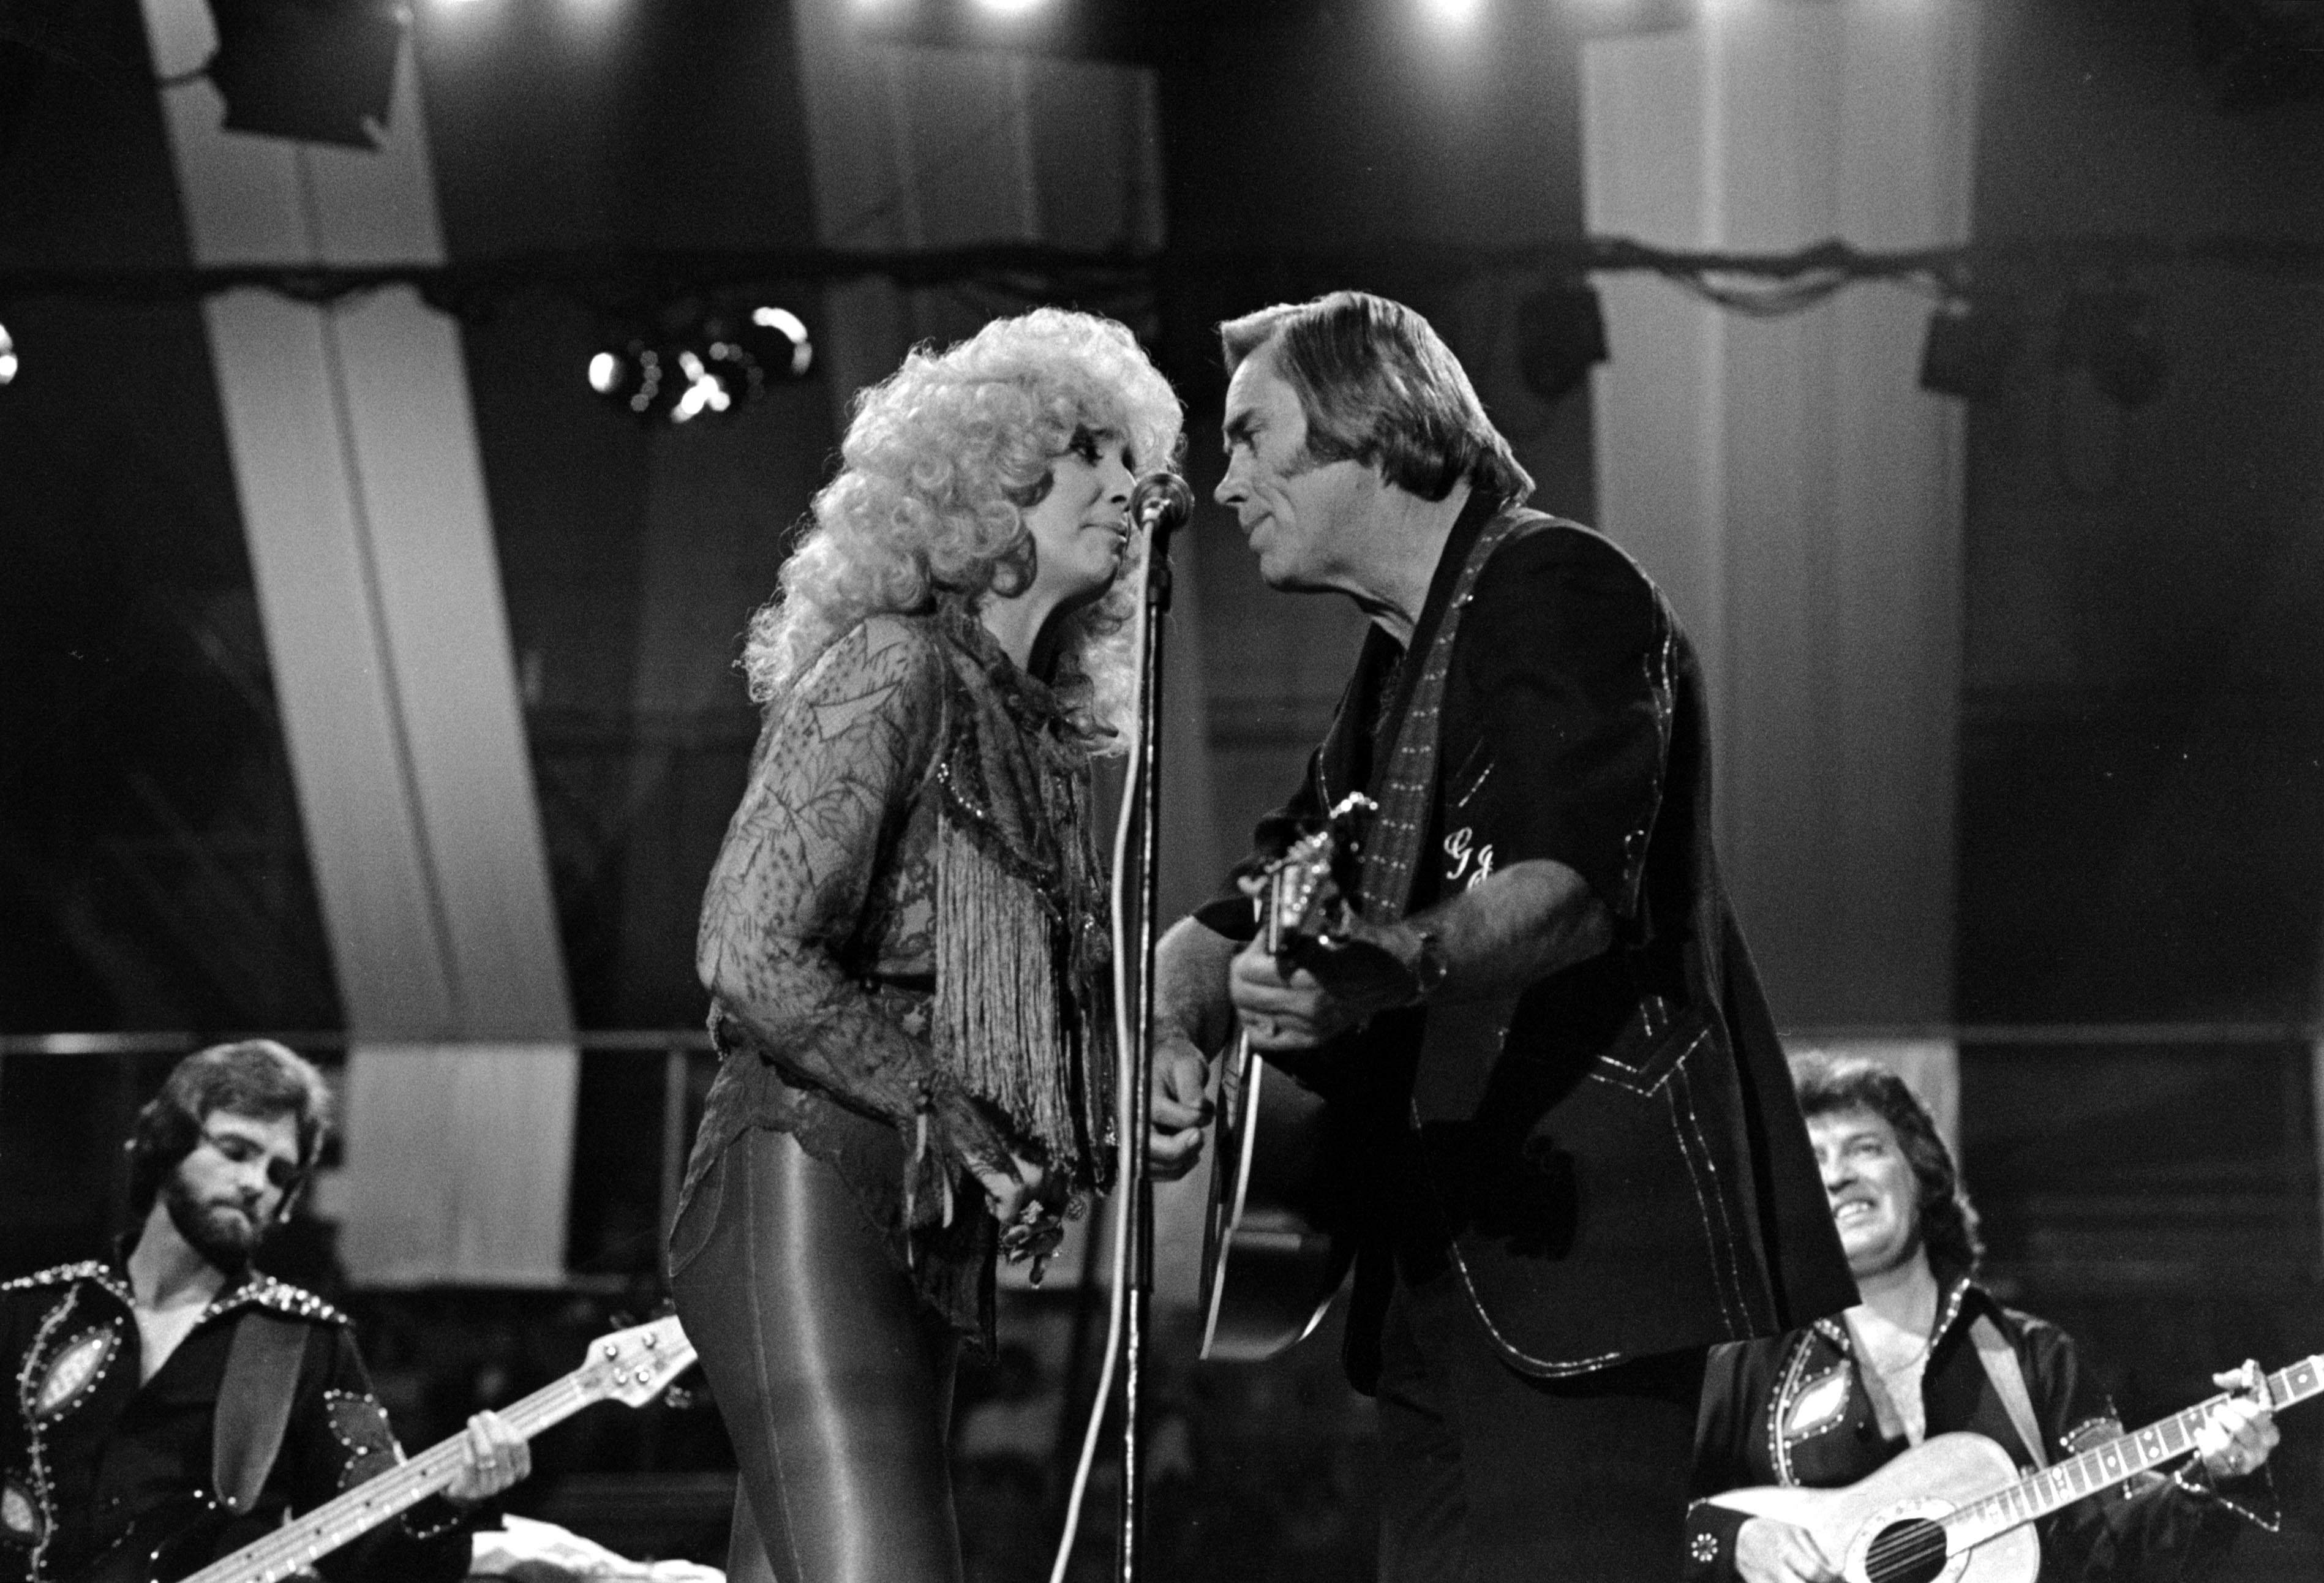 Tammy Wynette And George Jones perform at the Wembley Arena, London in 1981. | Source: Getty Images